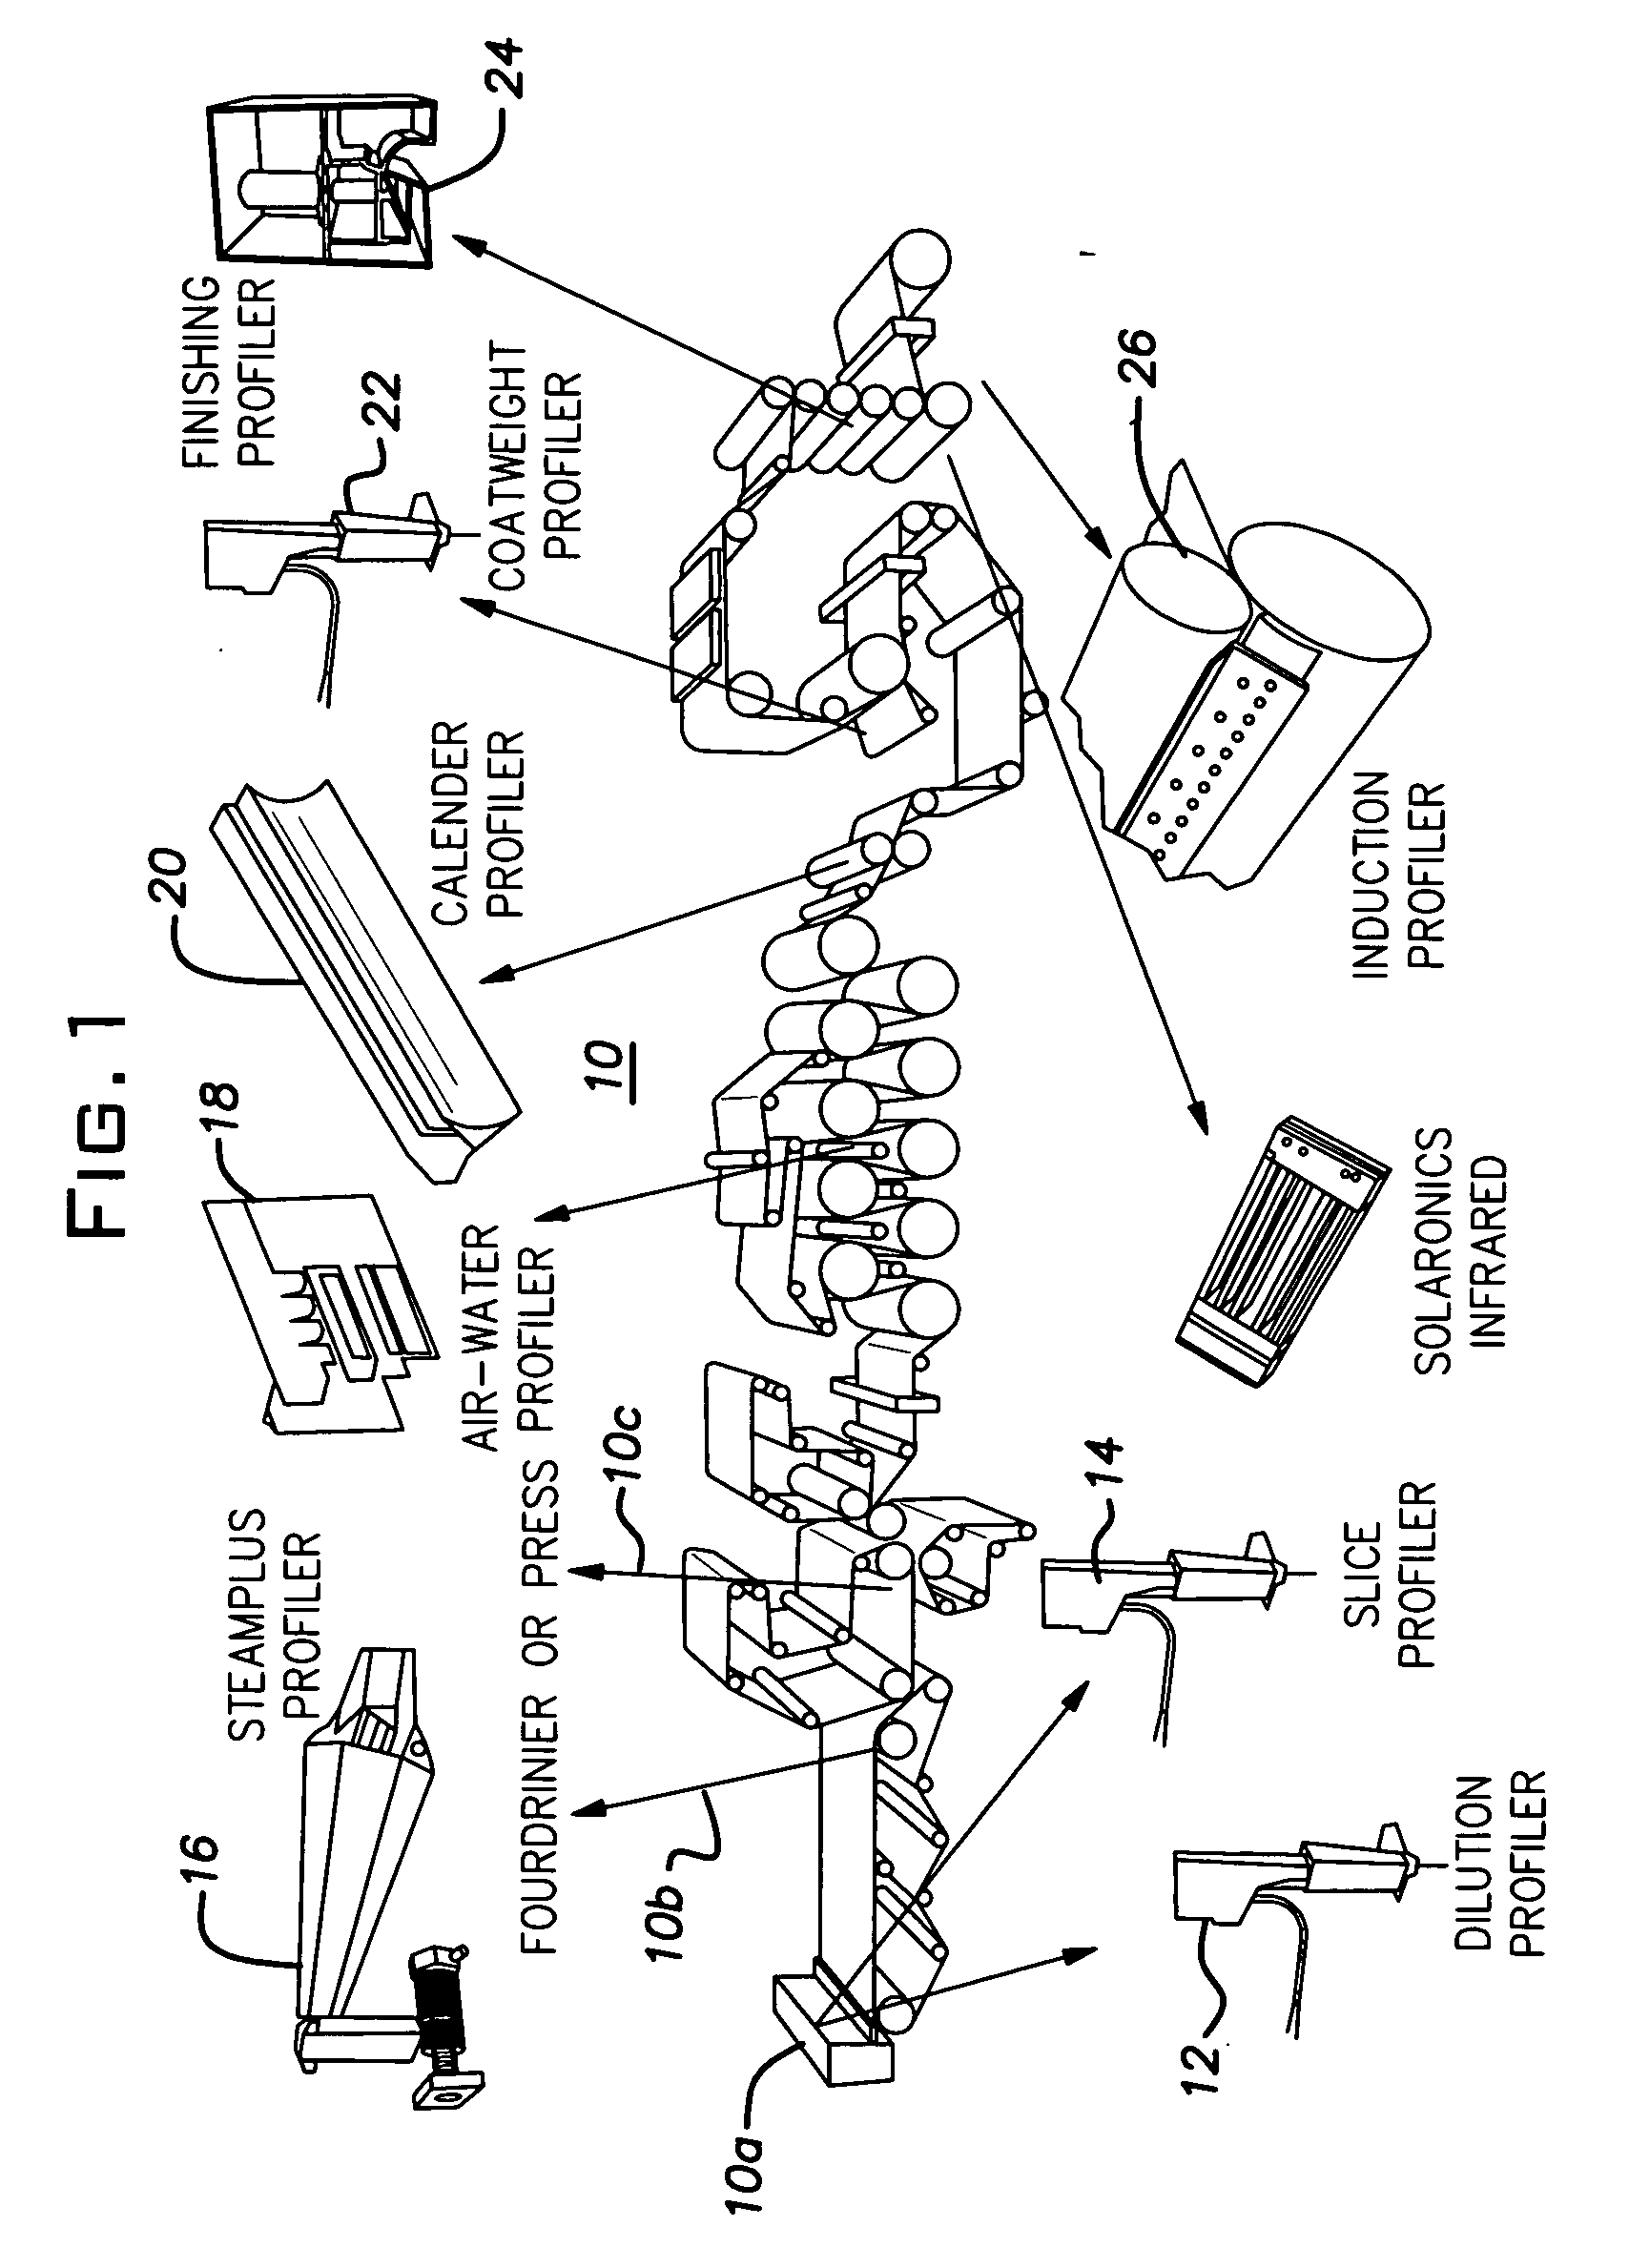 Actuator system for use in control of a sheet or web forming process